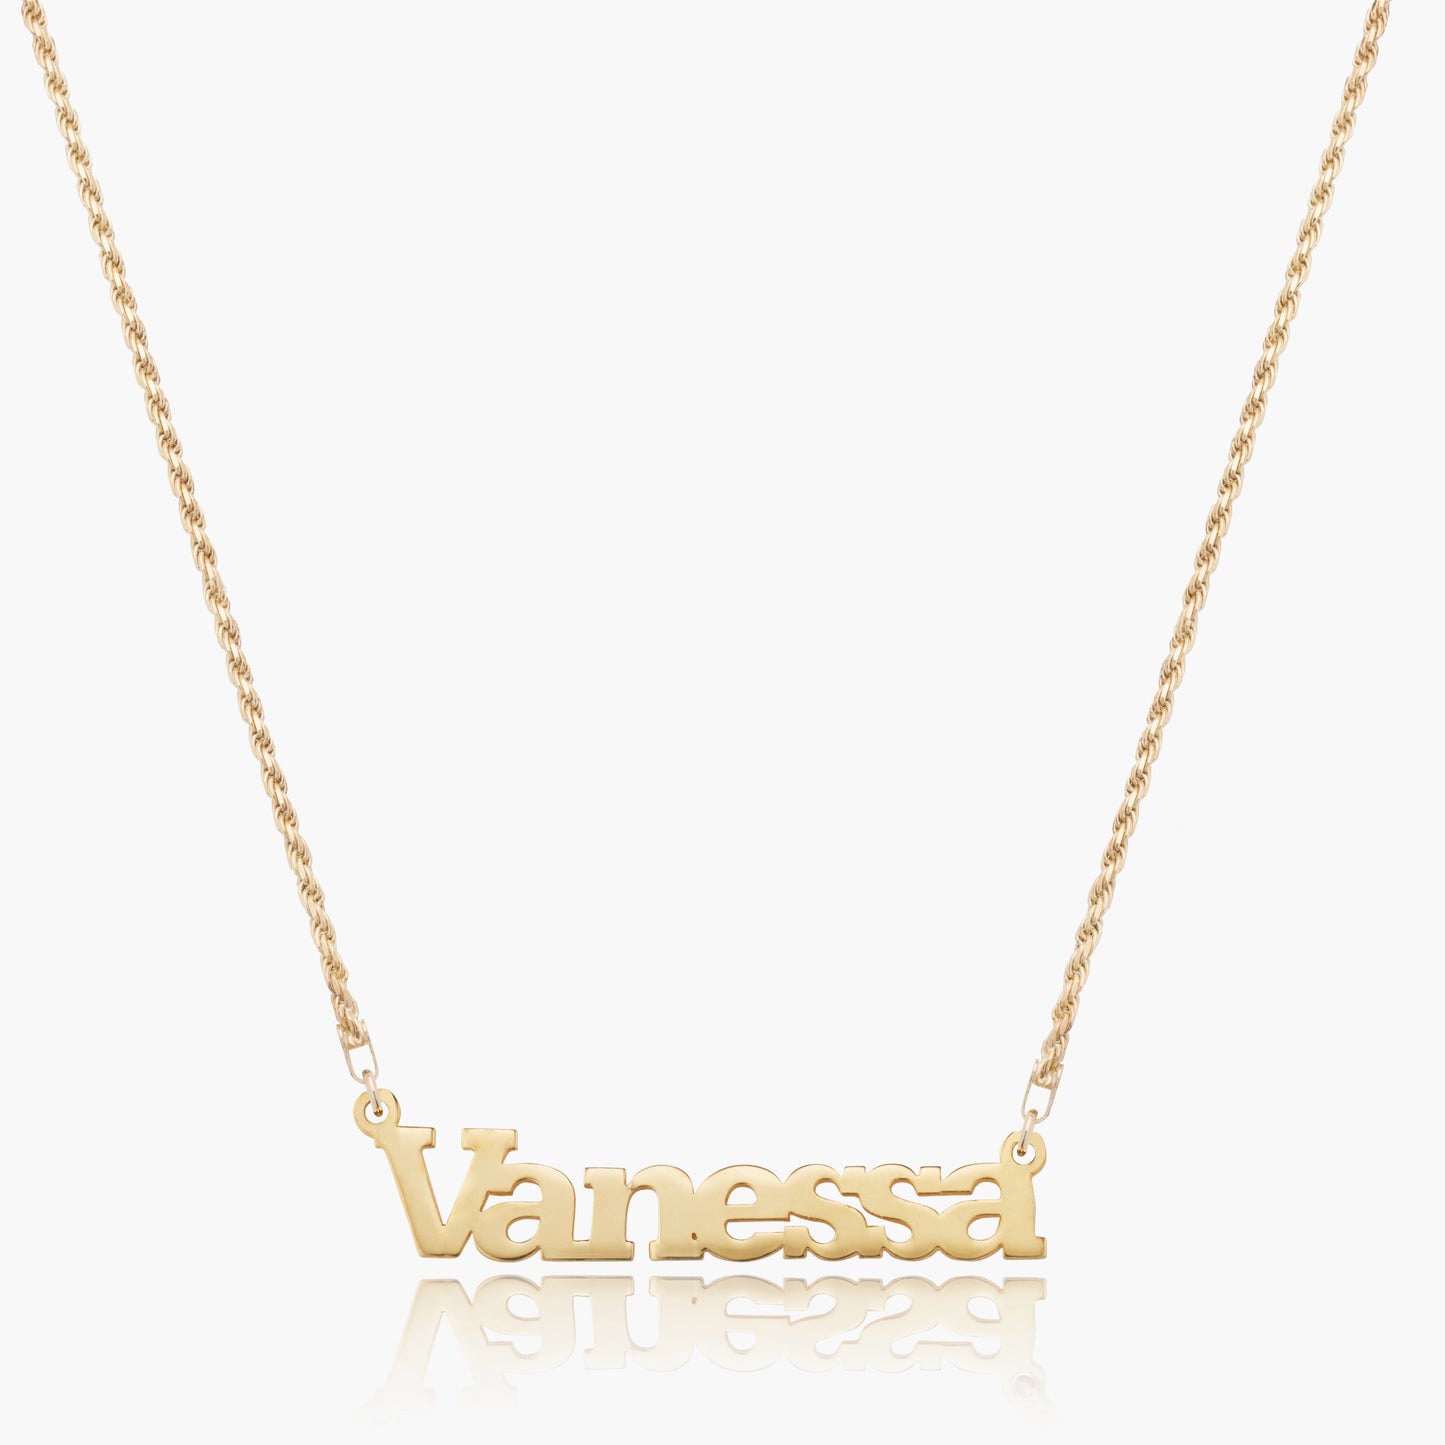 Kid's Times New Roman Name Necklace